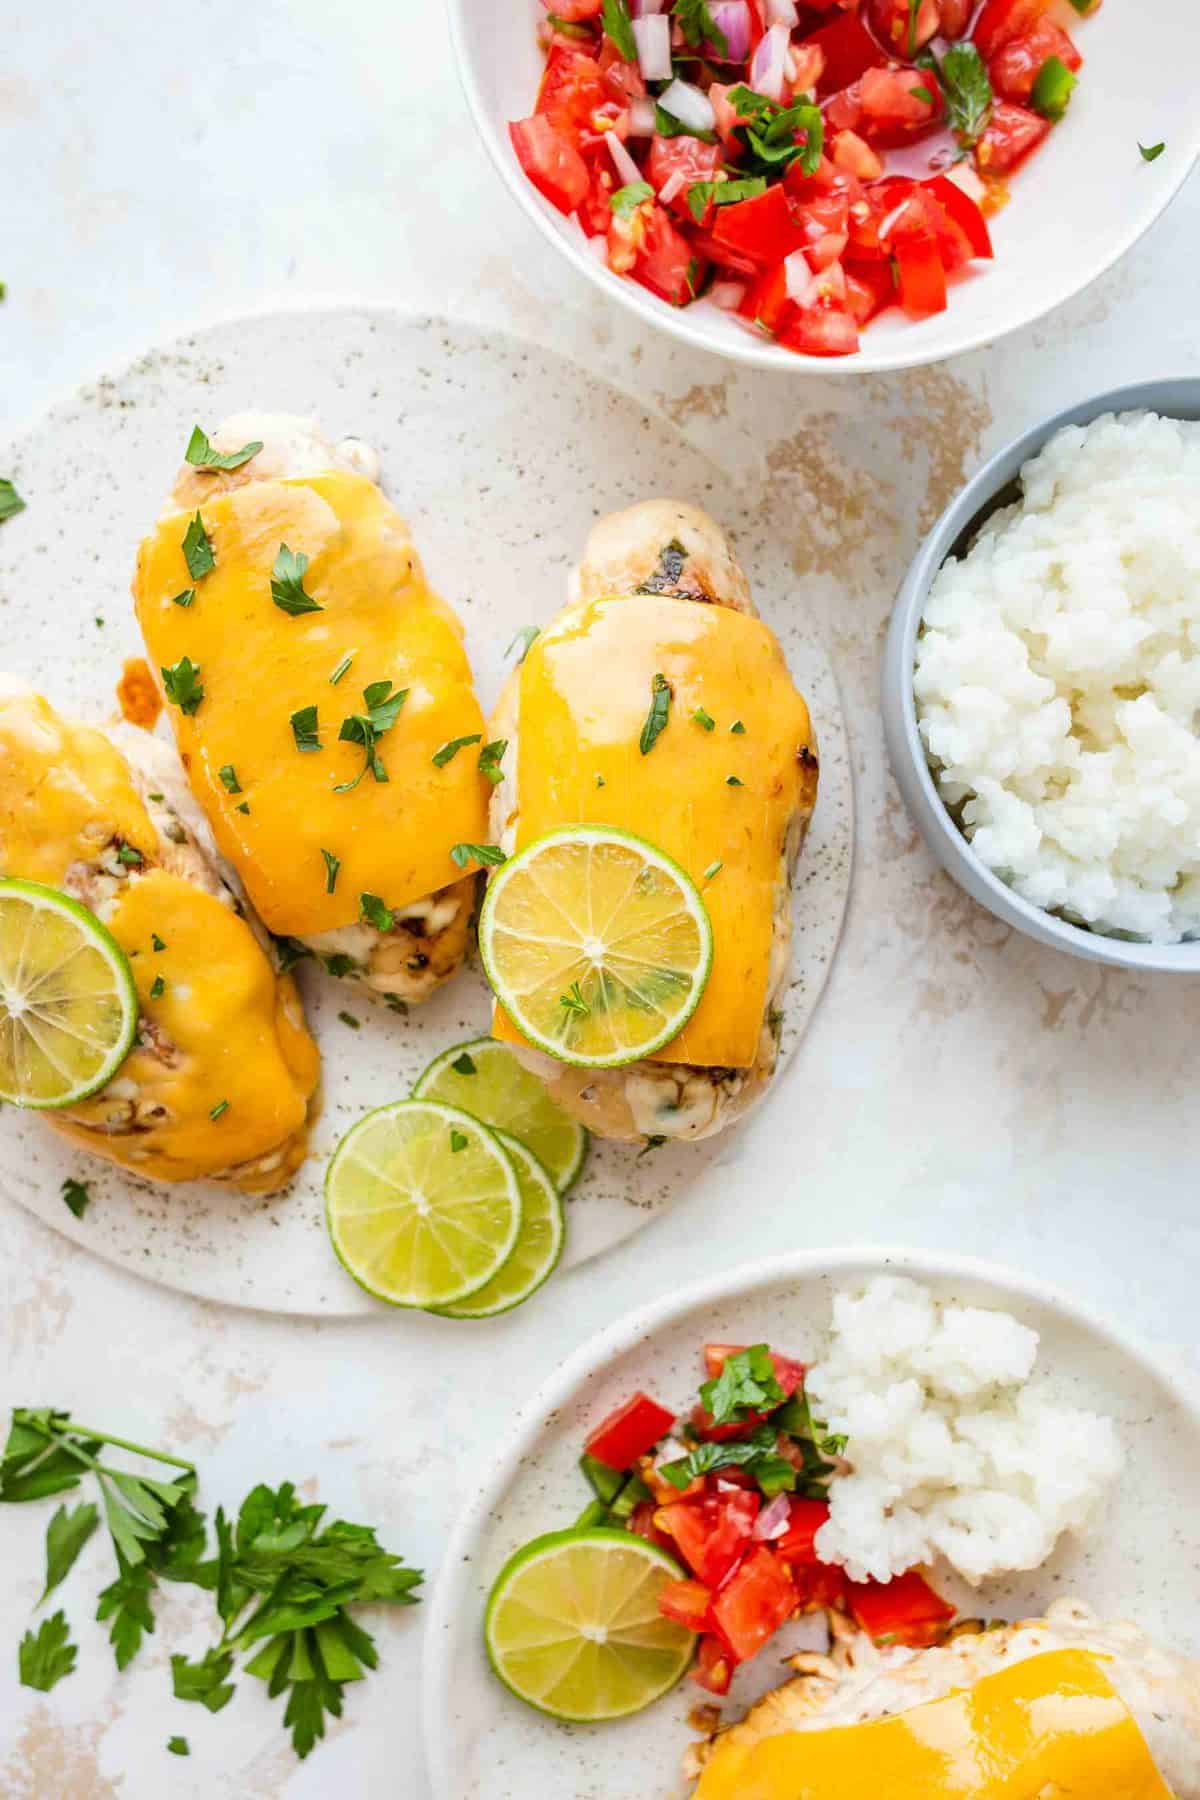 Three Fiesta Lime Chicken breasts on a plate